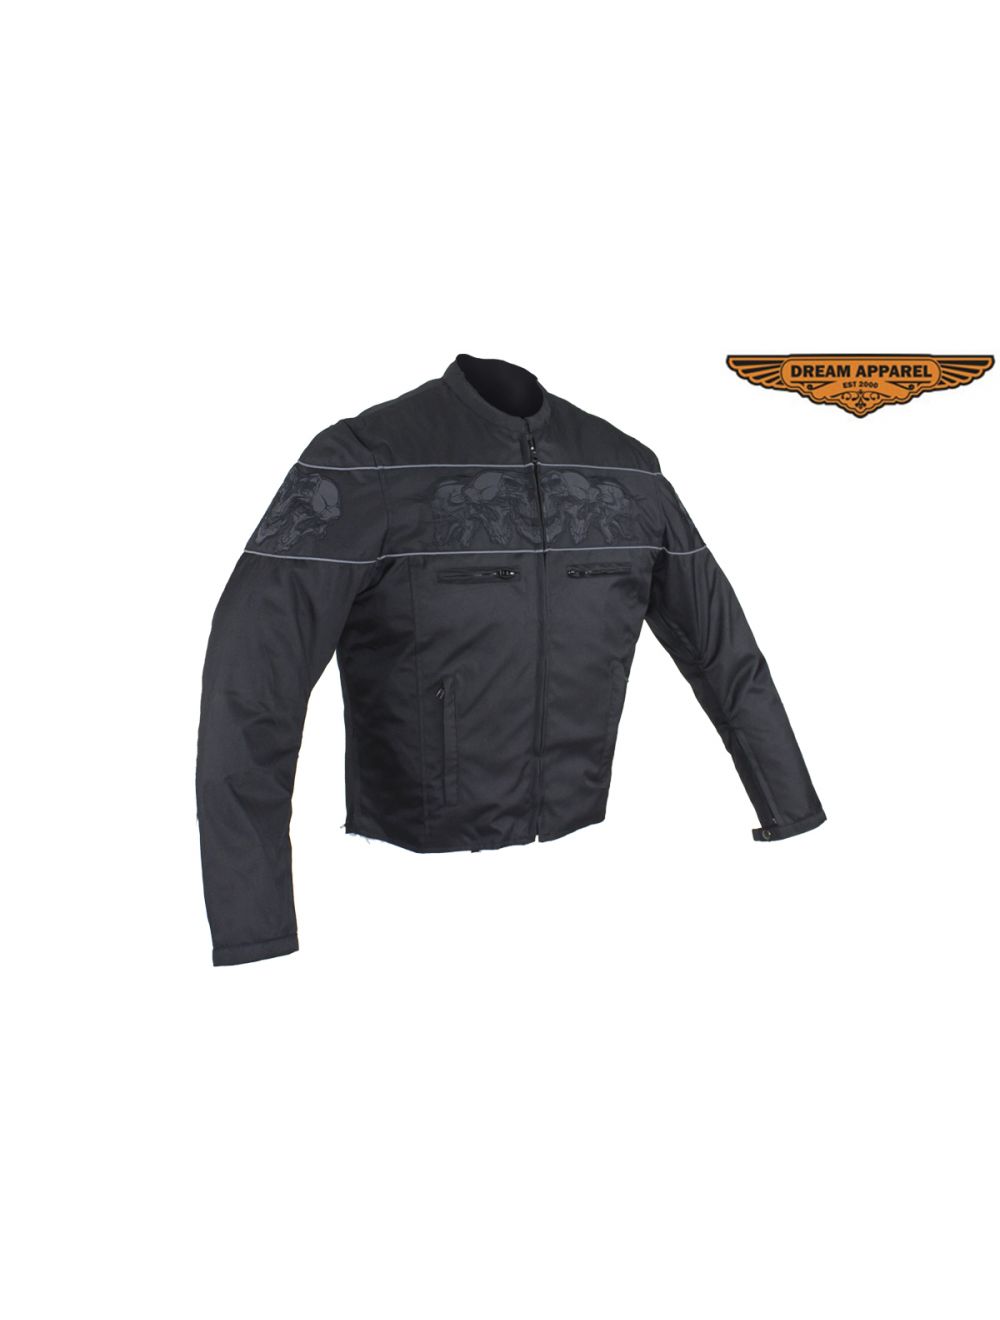 Mens Blue Racer Jacket With Reflective Piping